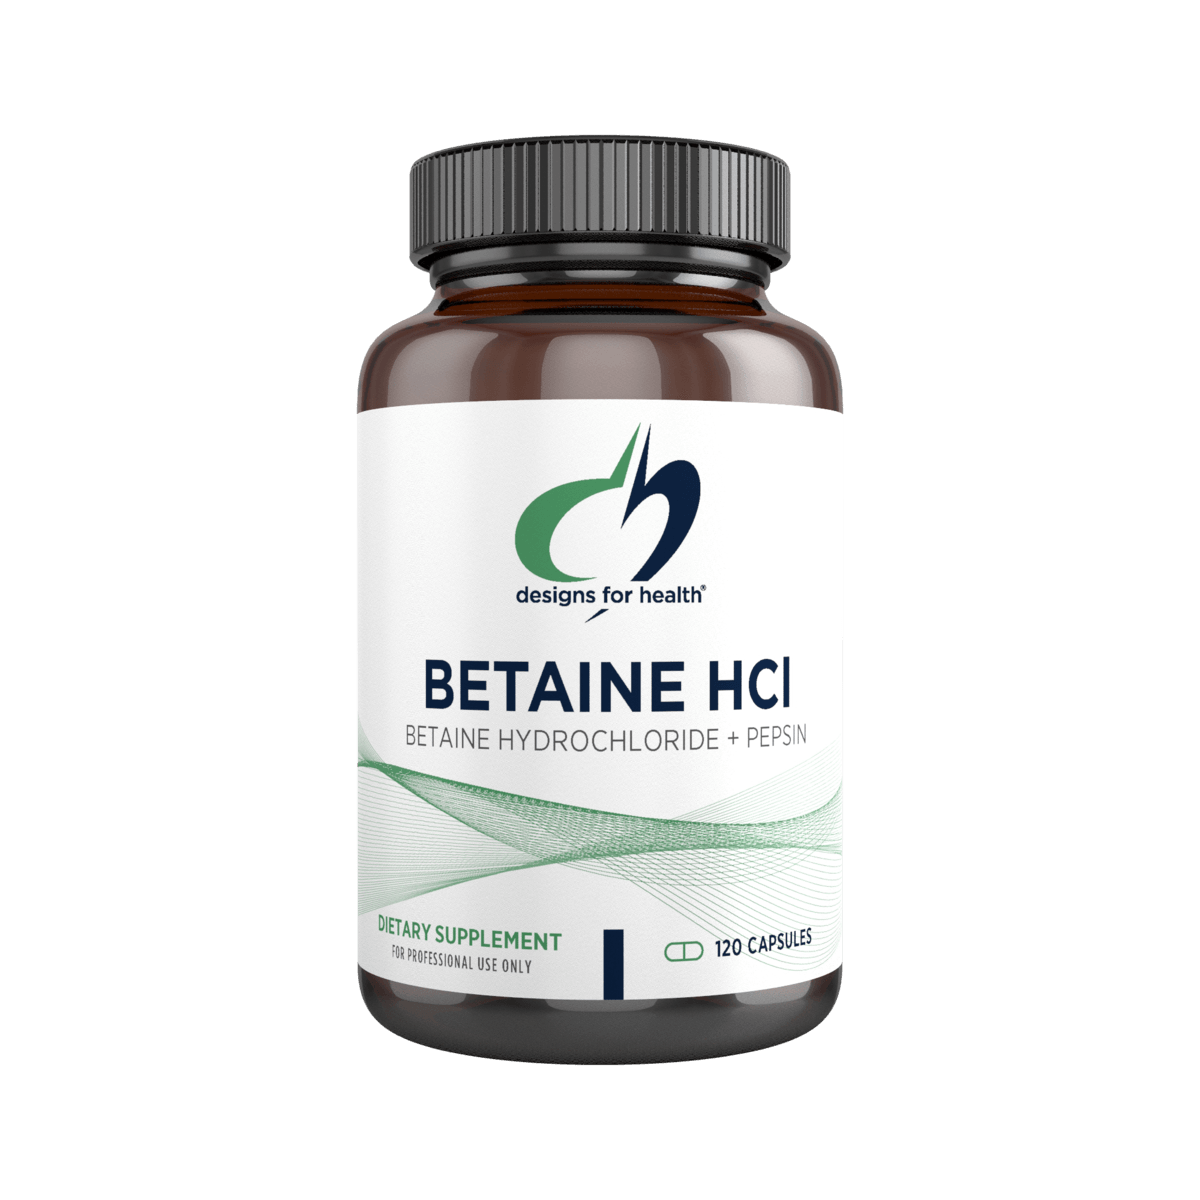 Betaine HCI Design for Health (DFH) New Zealand